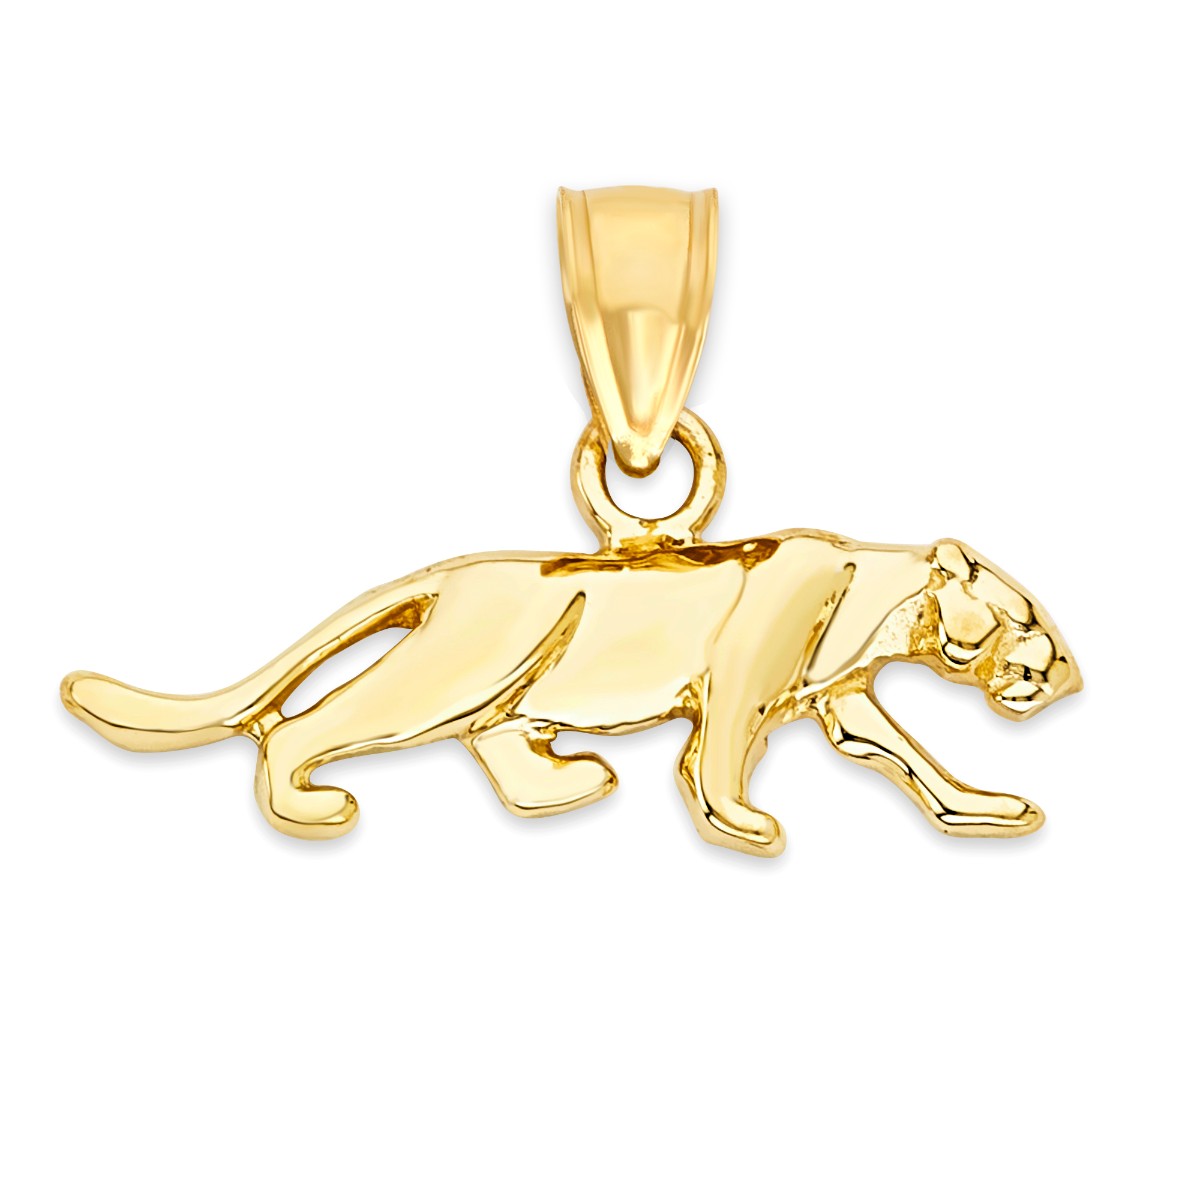 Solid Gold Panther Pendant - 10k or 14k